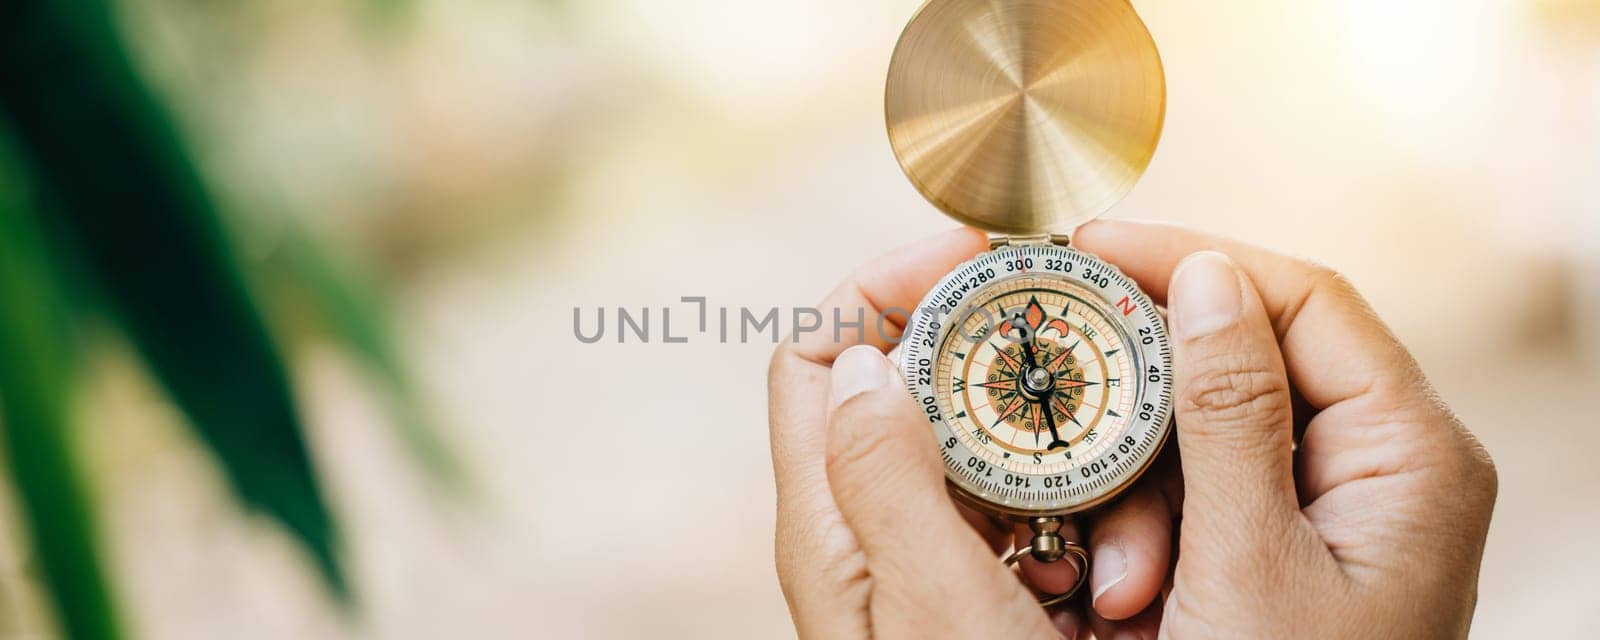 In a close-up shot a woman uses a compass in the forest. Her hand holds the compass representing guidance and exploration. by Sorapop